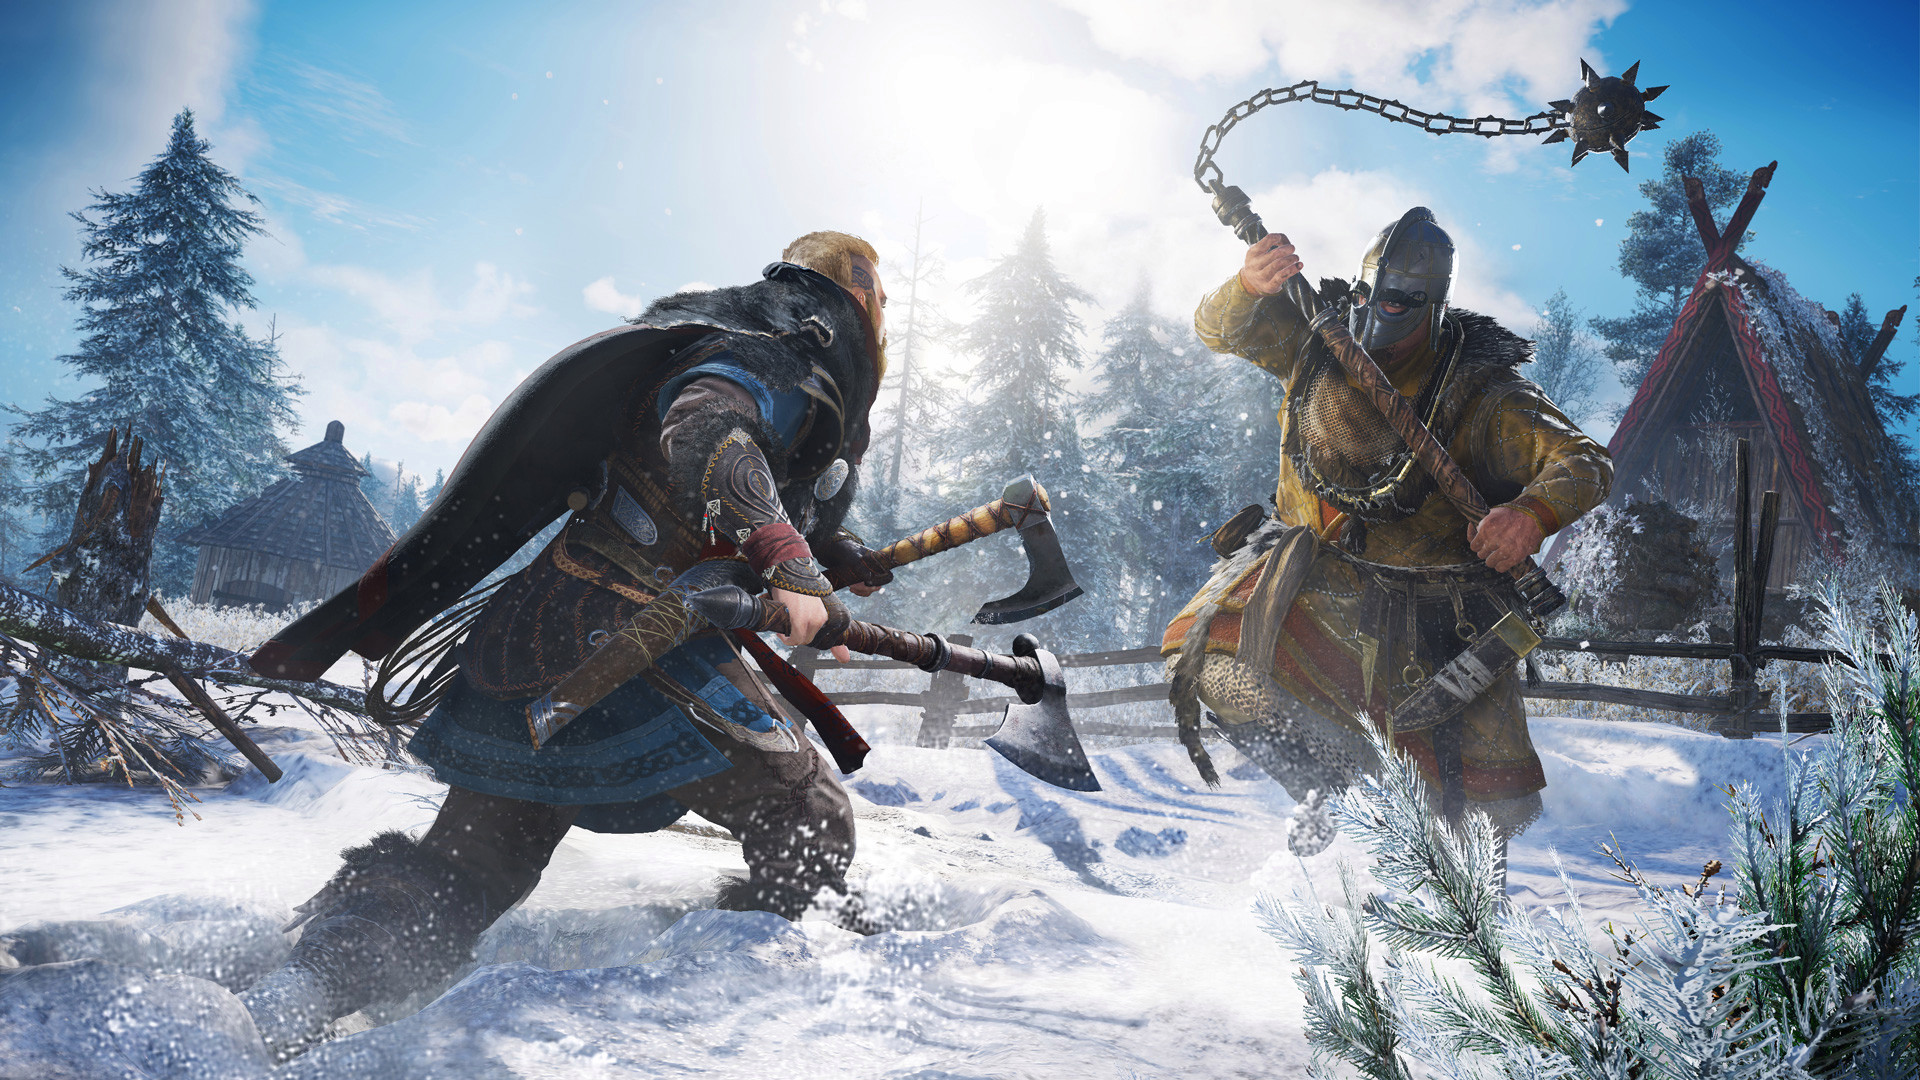 Ubisoft Reveals File Size For Assassin’s Creed: Valhalla And Provide Day-One Patch Notes